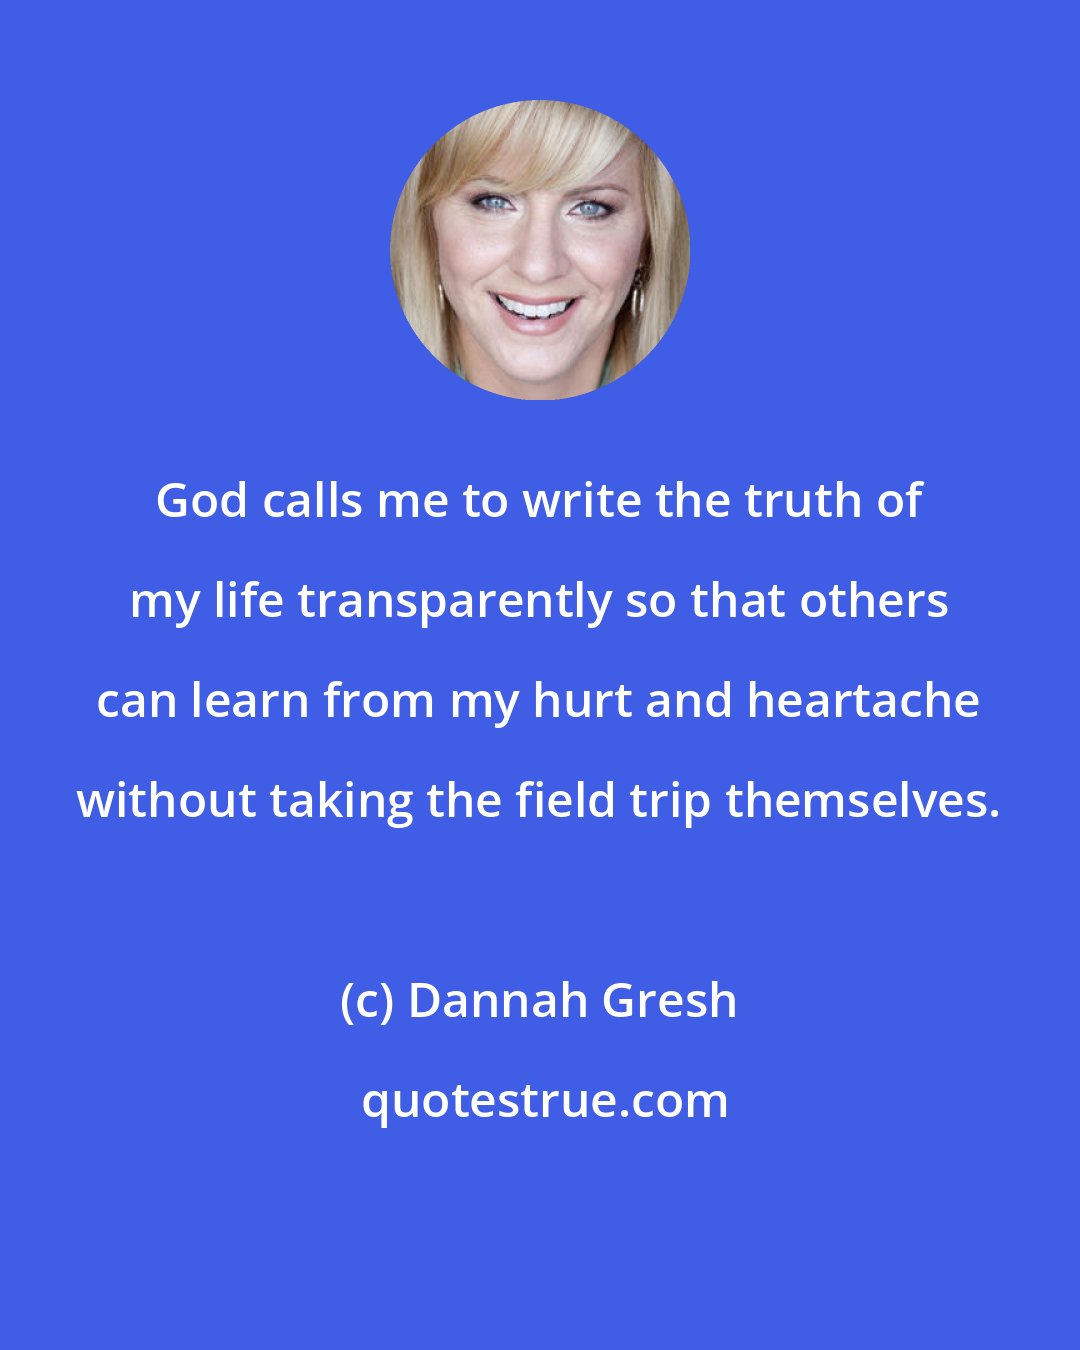 Dannah Gresh: God calls me to write the truth of my life transparently so that others can learn from my hurt and heartache without taking the field trip themselves.